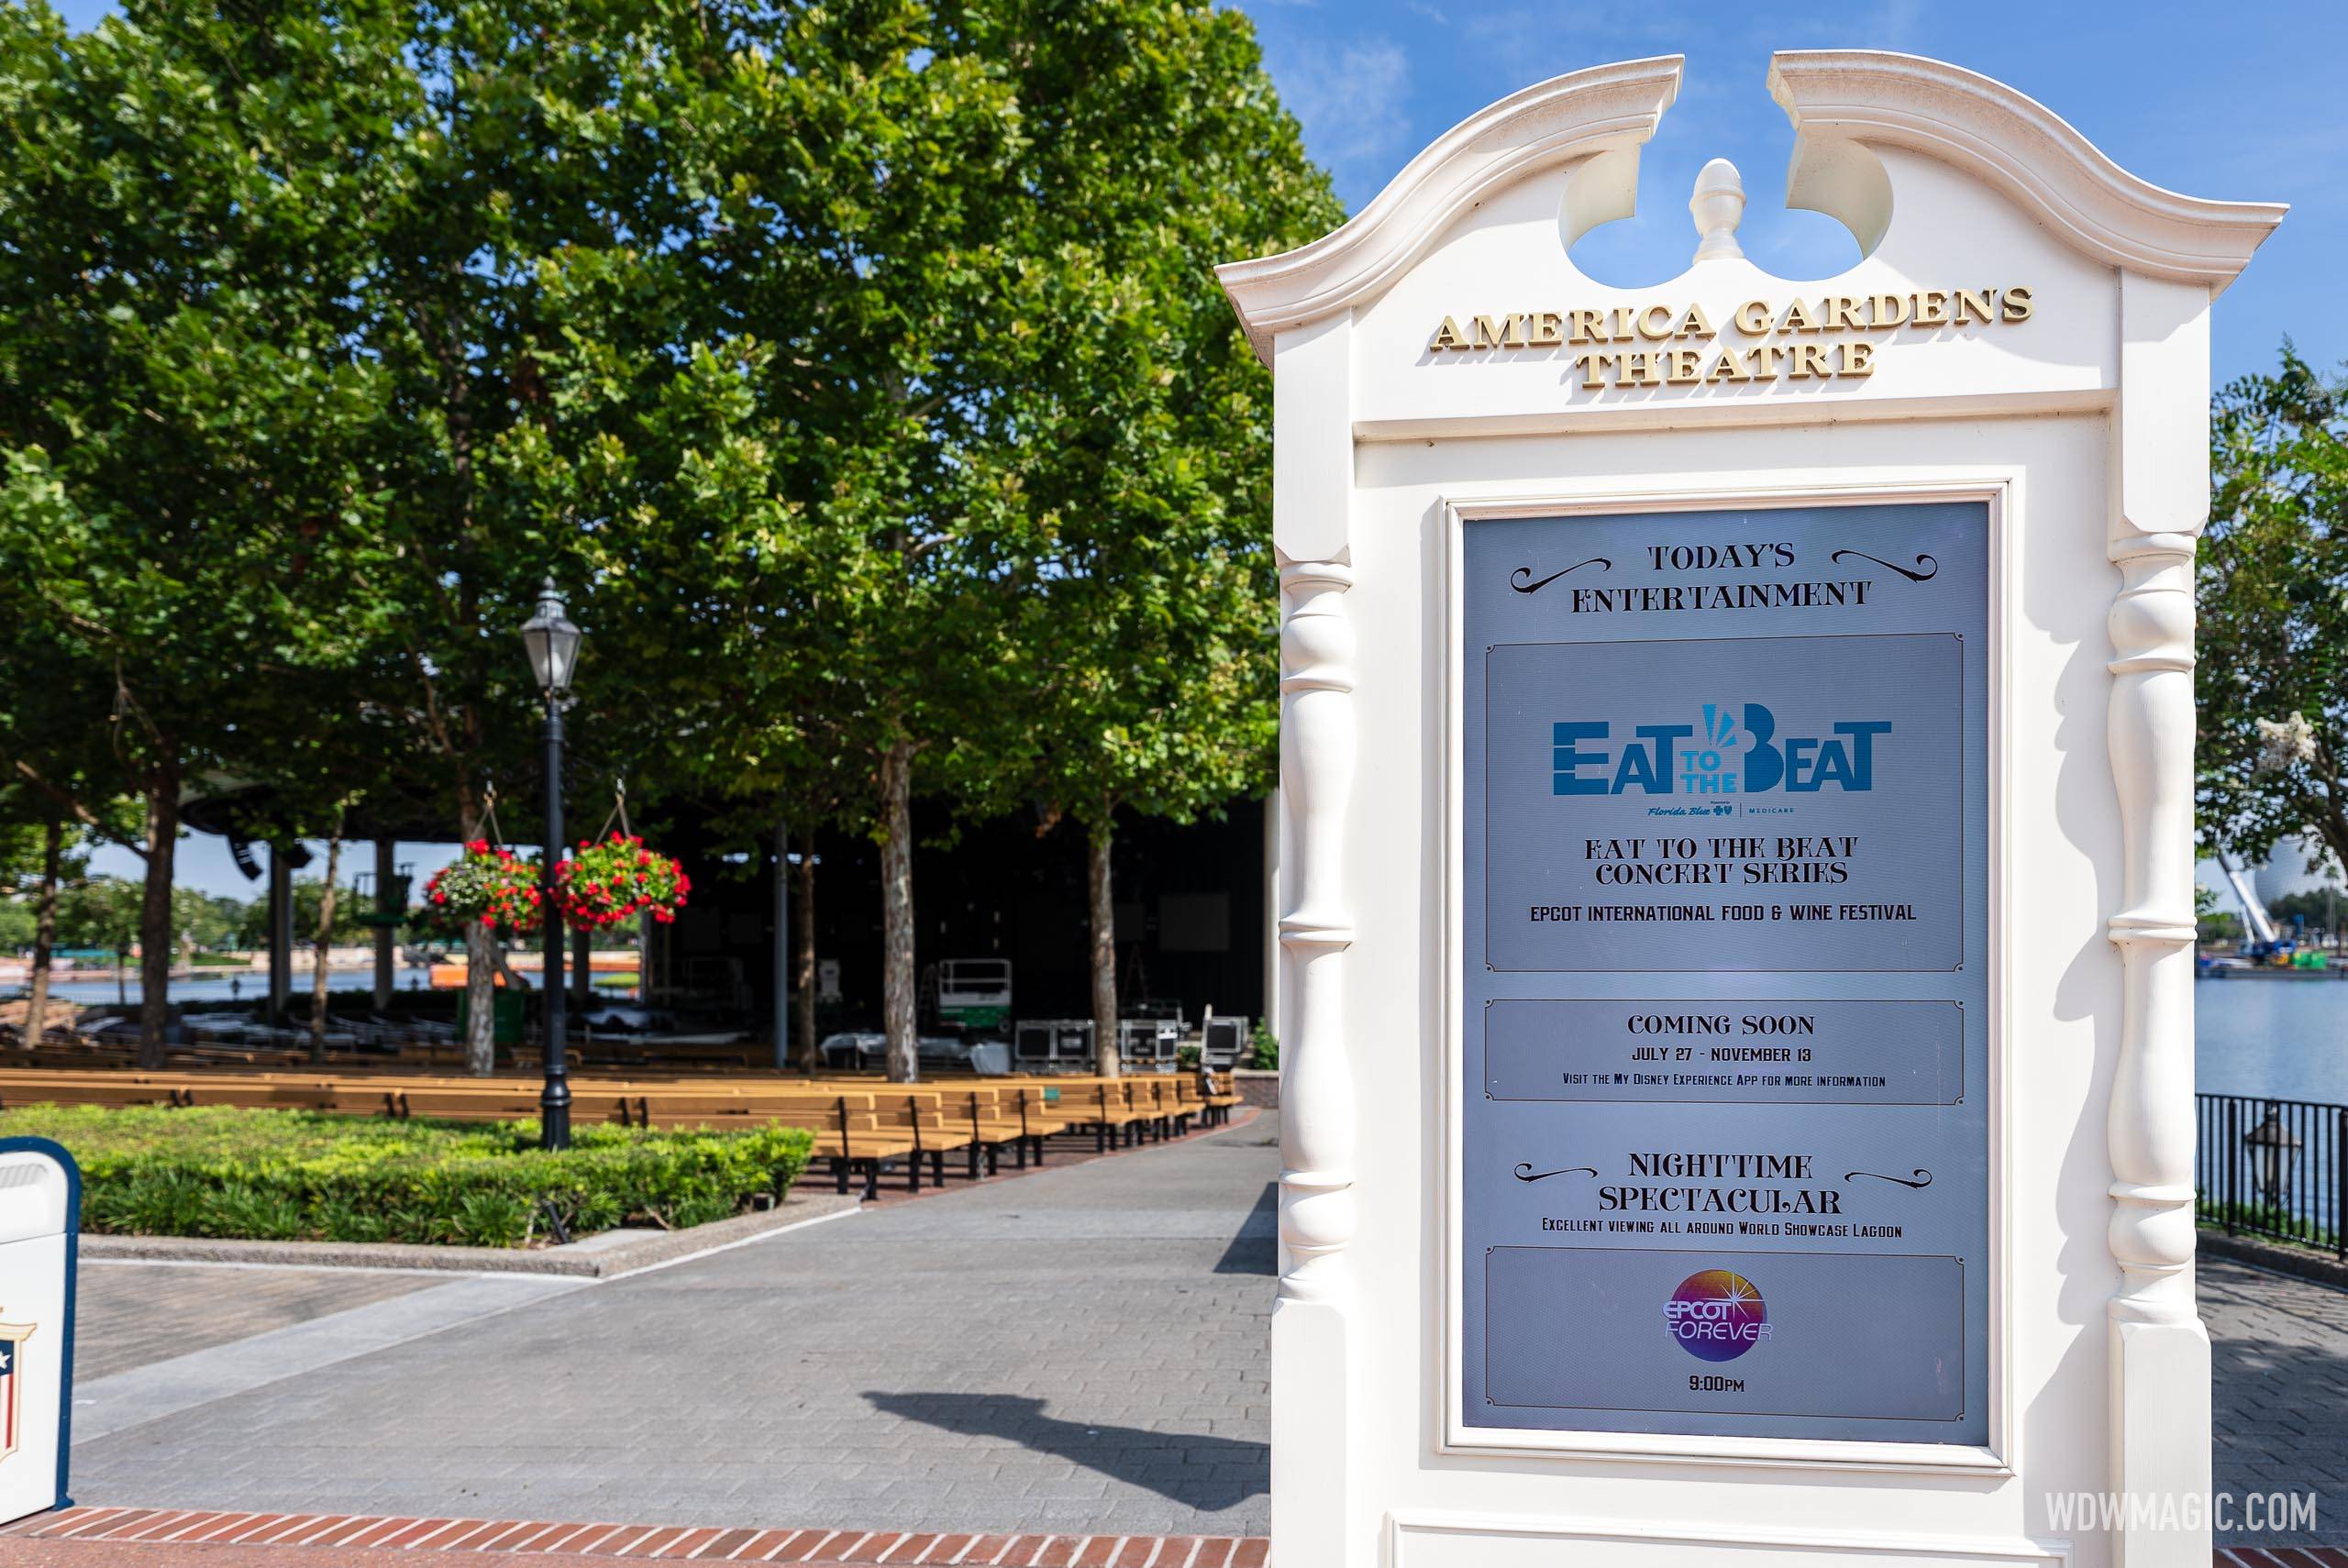 America Gardens Theatre at EPCOT updated with new digital tip boards